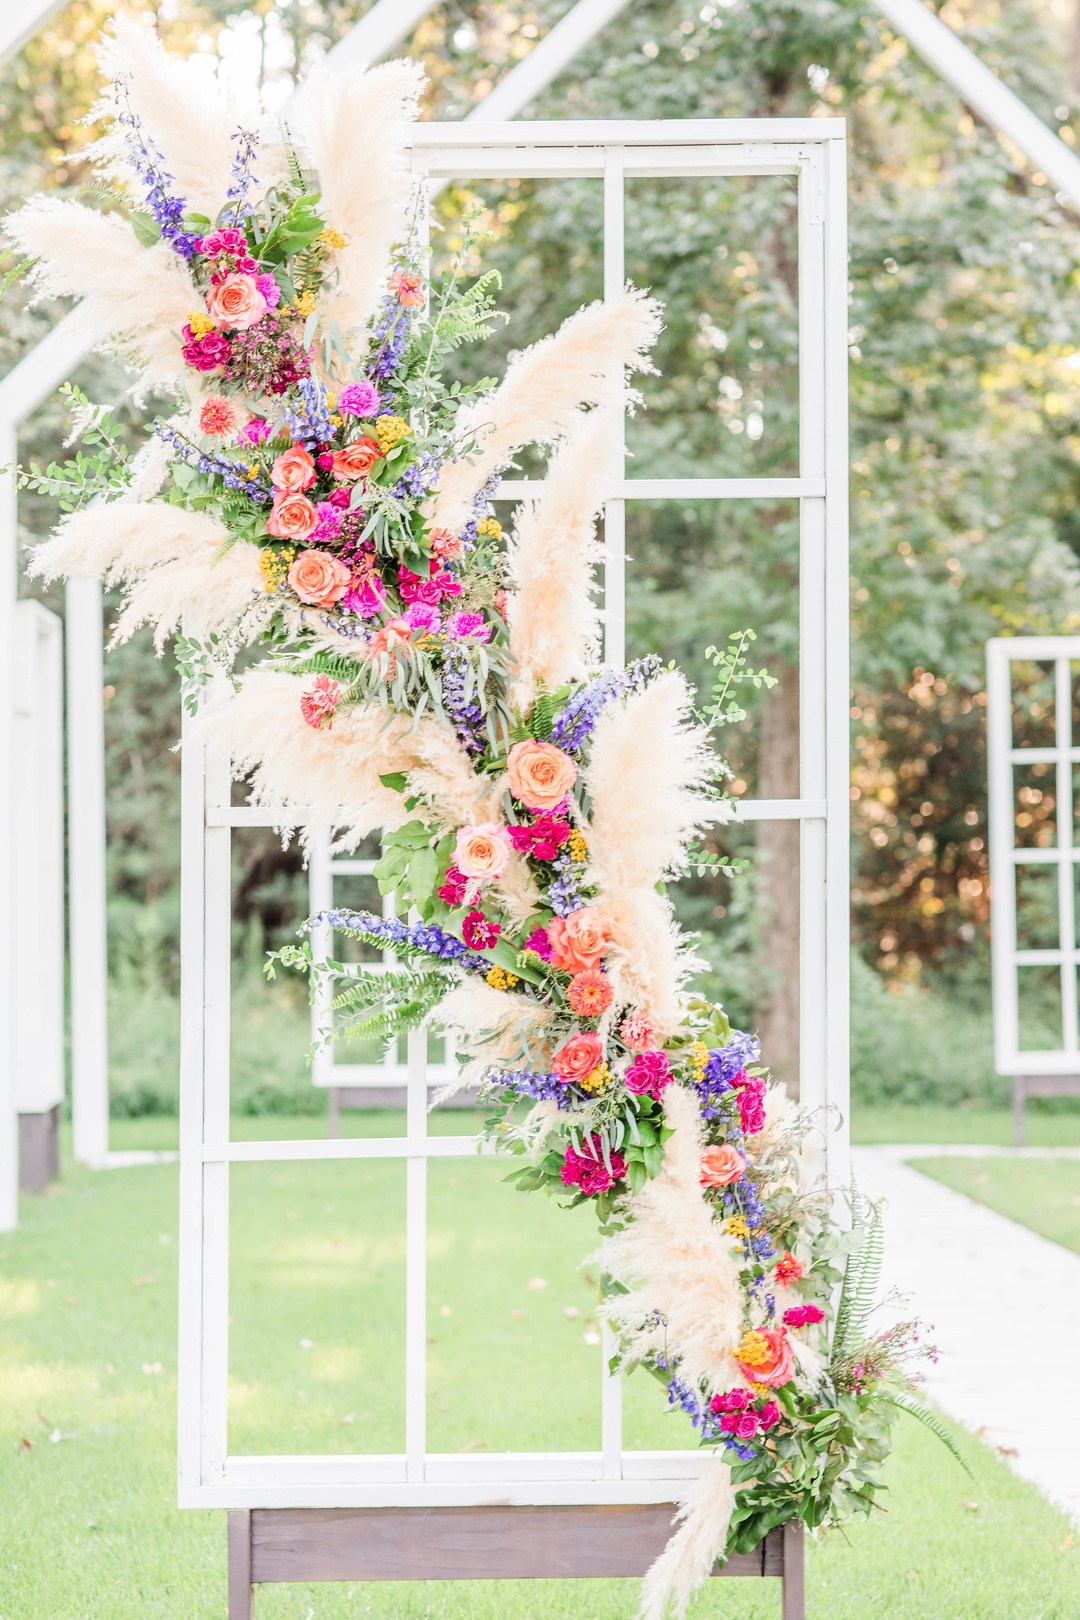 The chapel was also decorated with super bright blooms, greenery and pampas grass